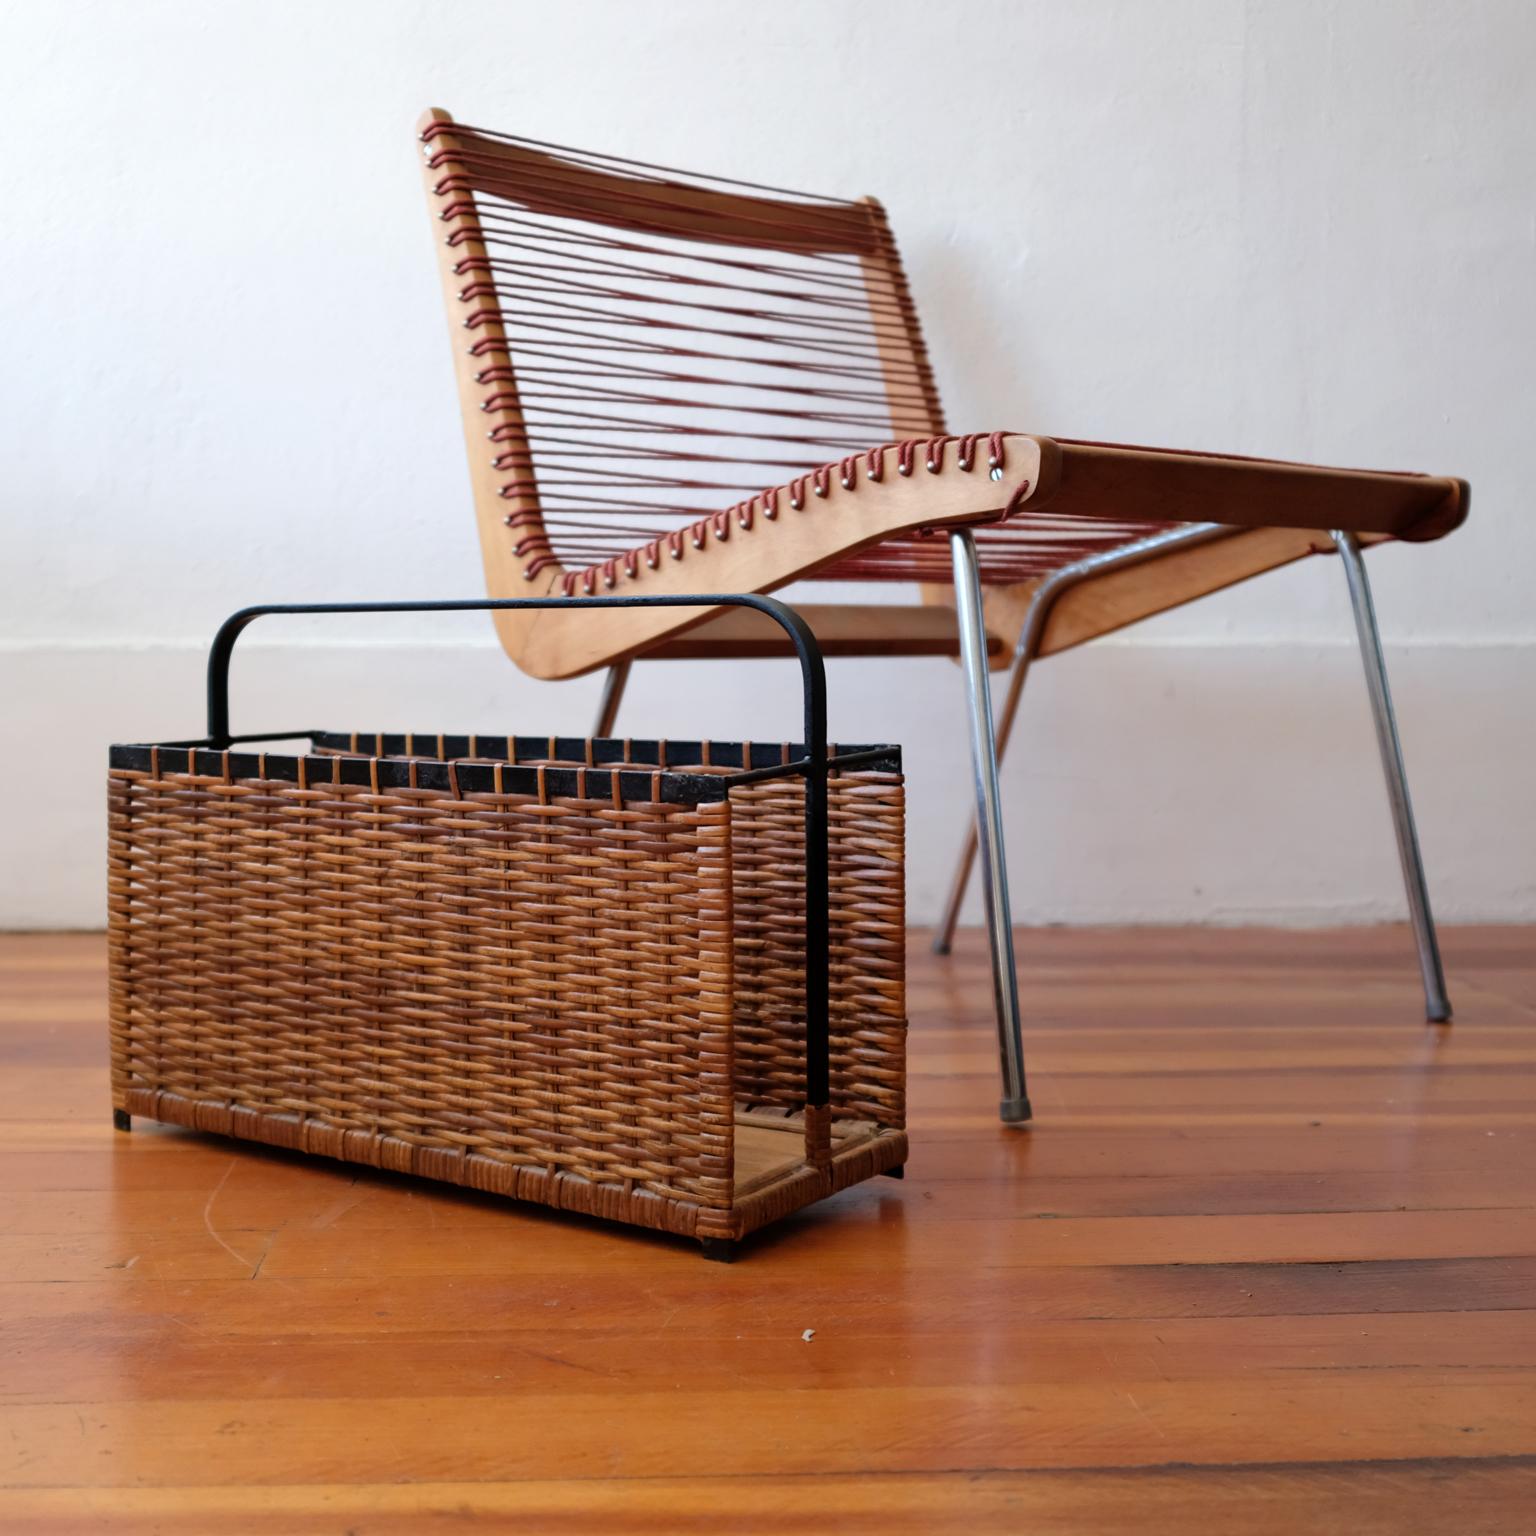 Woven cane and iron magazine holder from the 1950s.